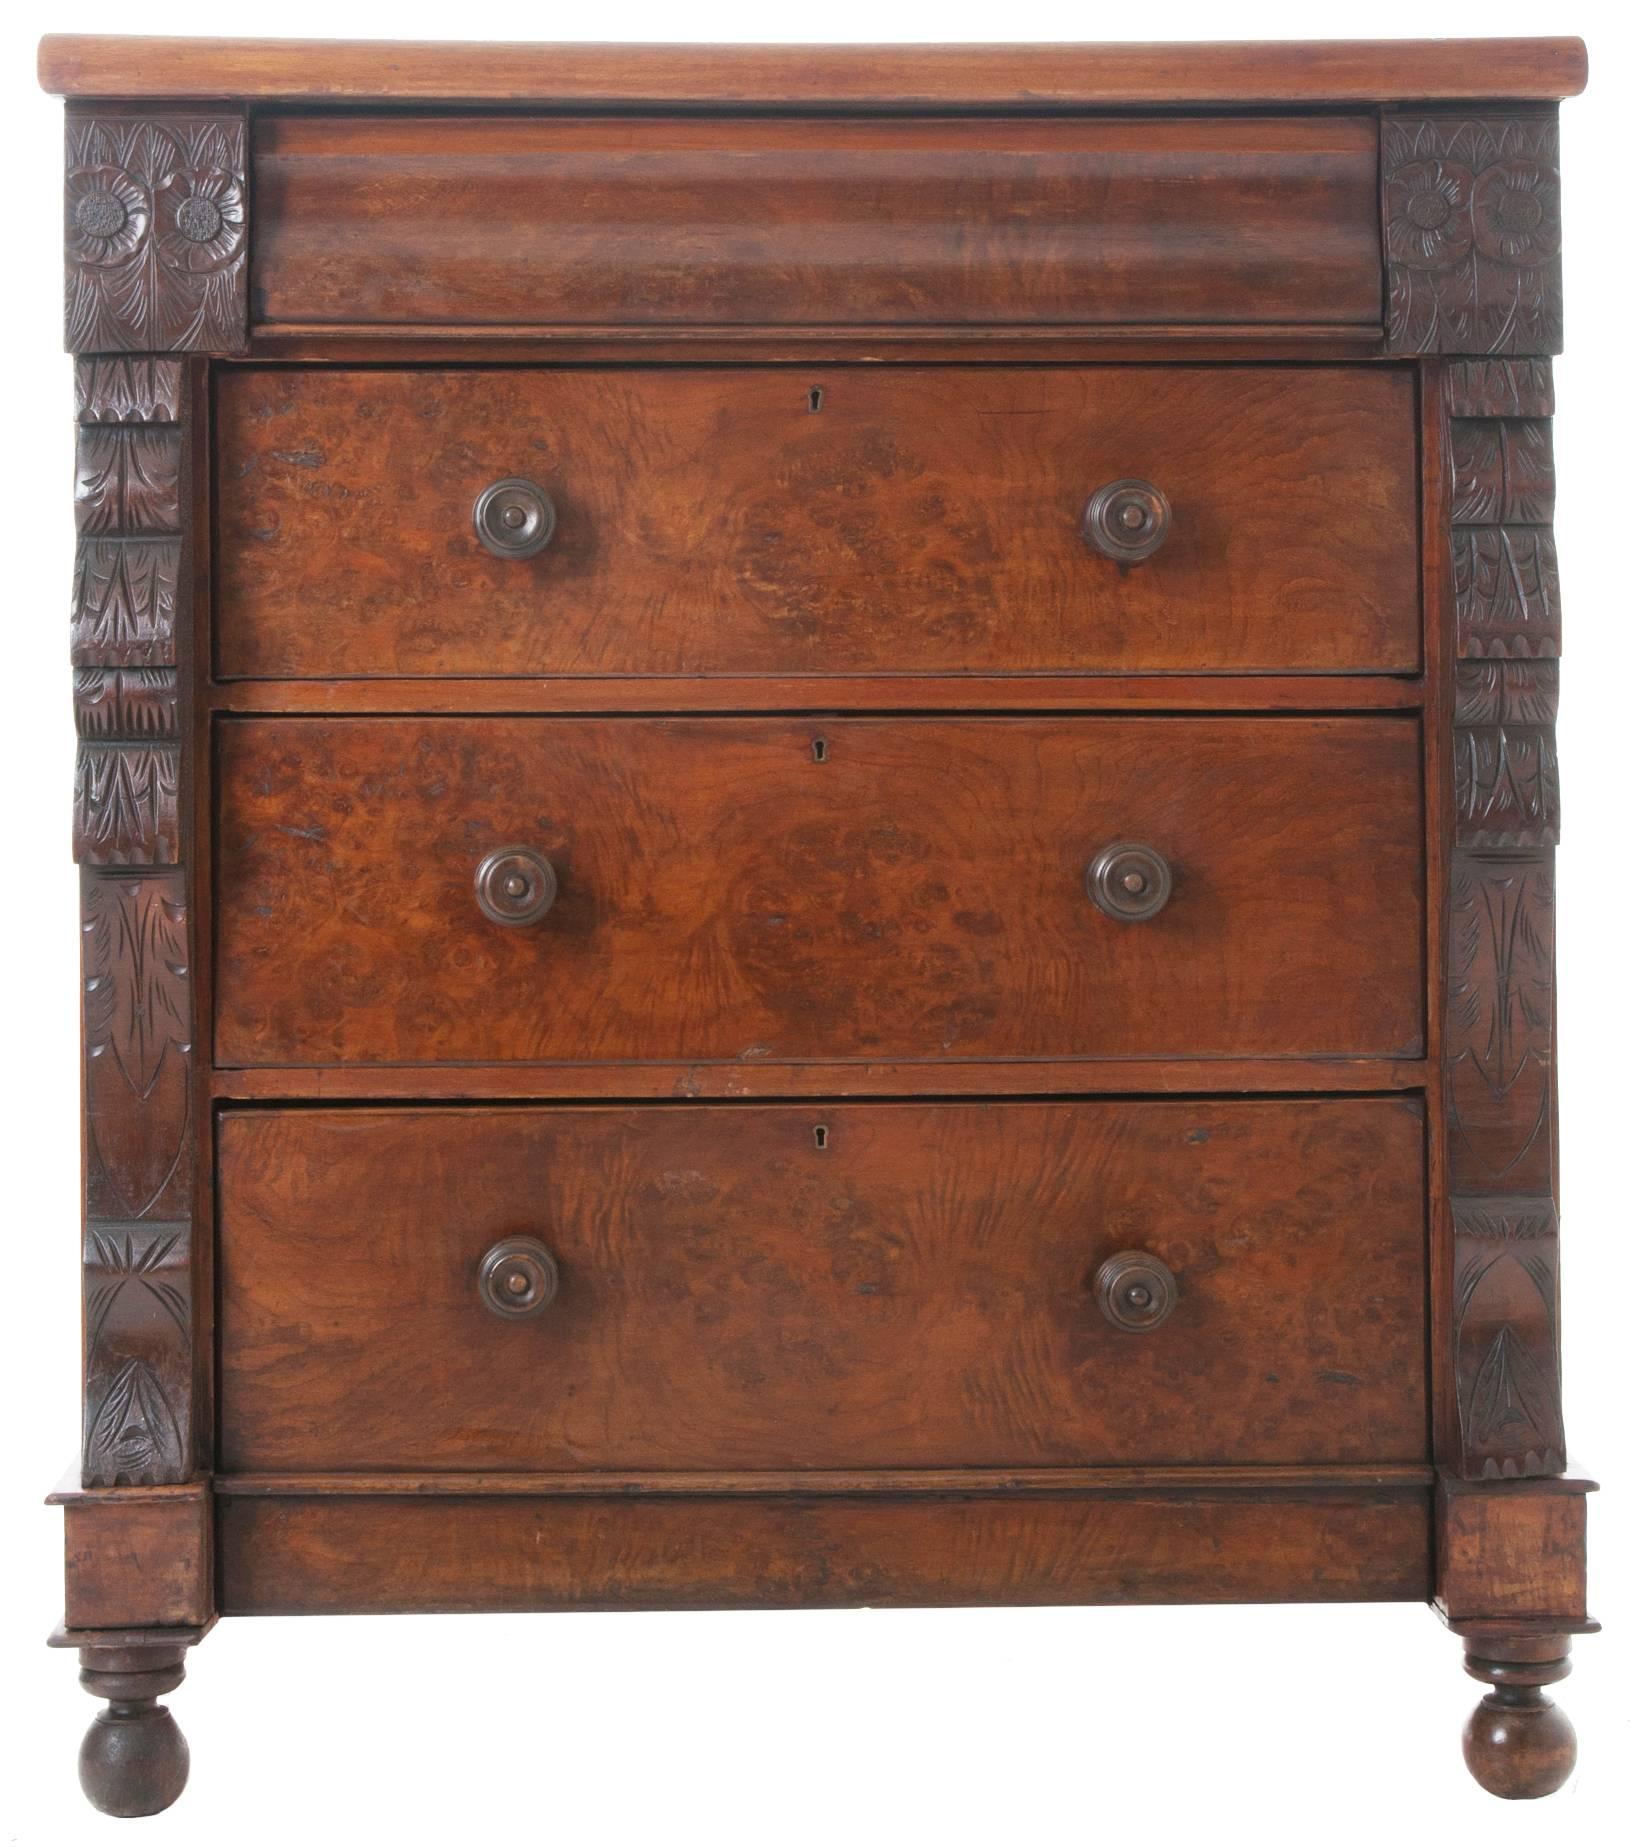 Large burled mahogany Scottish chest of drawers with solid mahogany top. Three drawers are across the top, carved sunflowers adorn the small drawers with a longer shaped front drawer in between. Below are three burled front drawers each with two